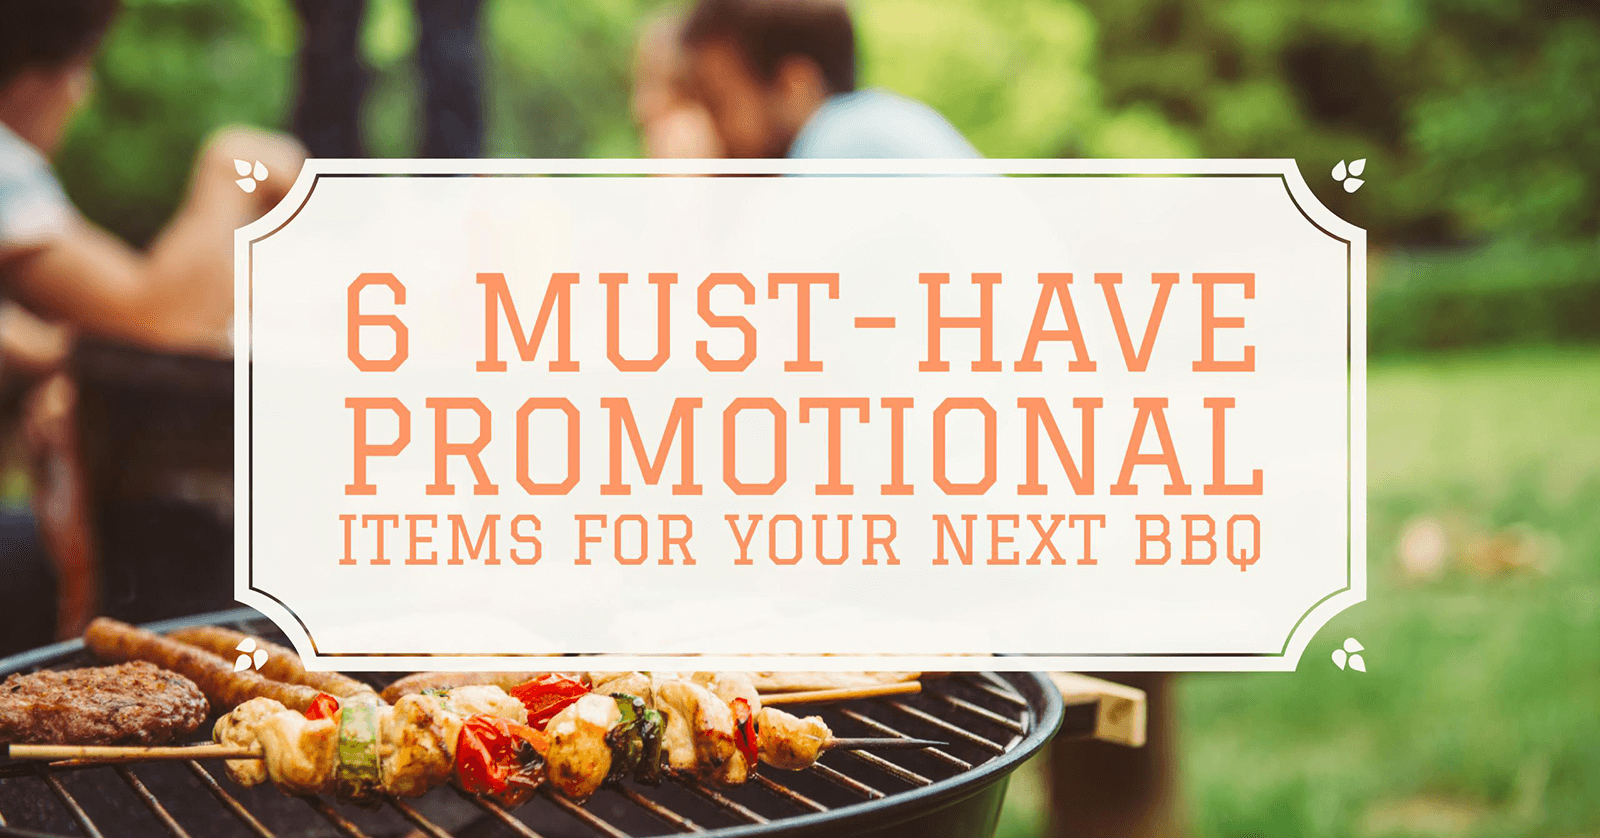 6 Must-Have Promotional Items For Your Next BBQ